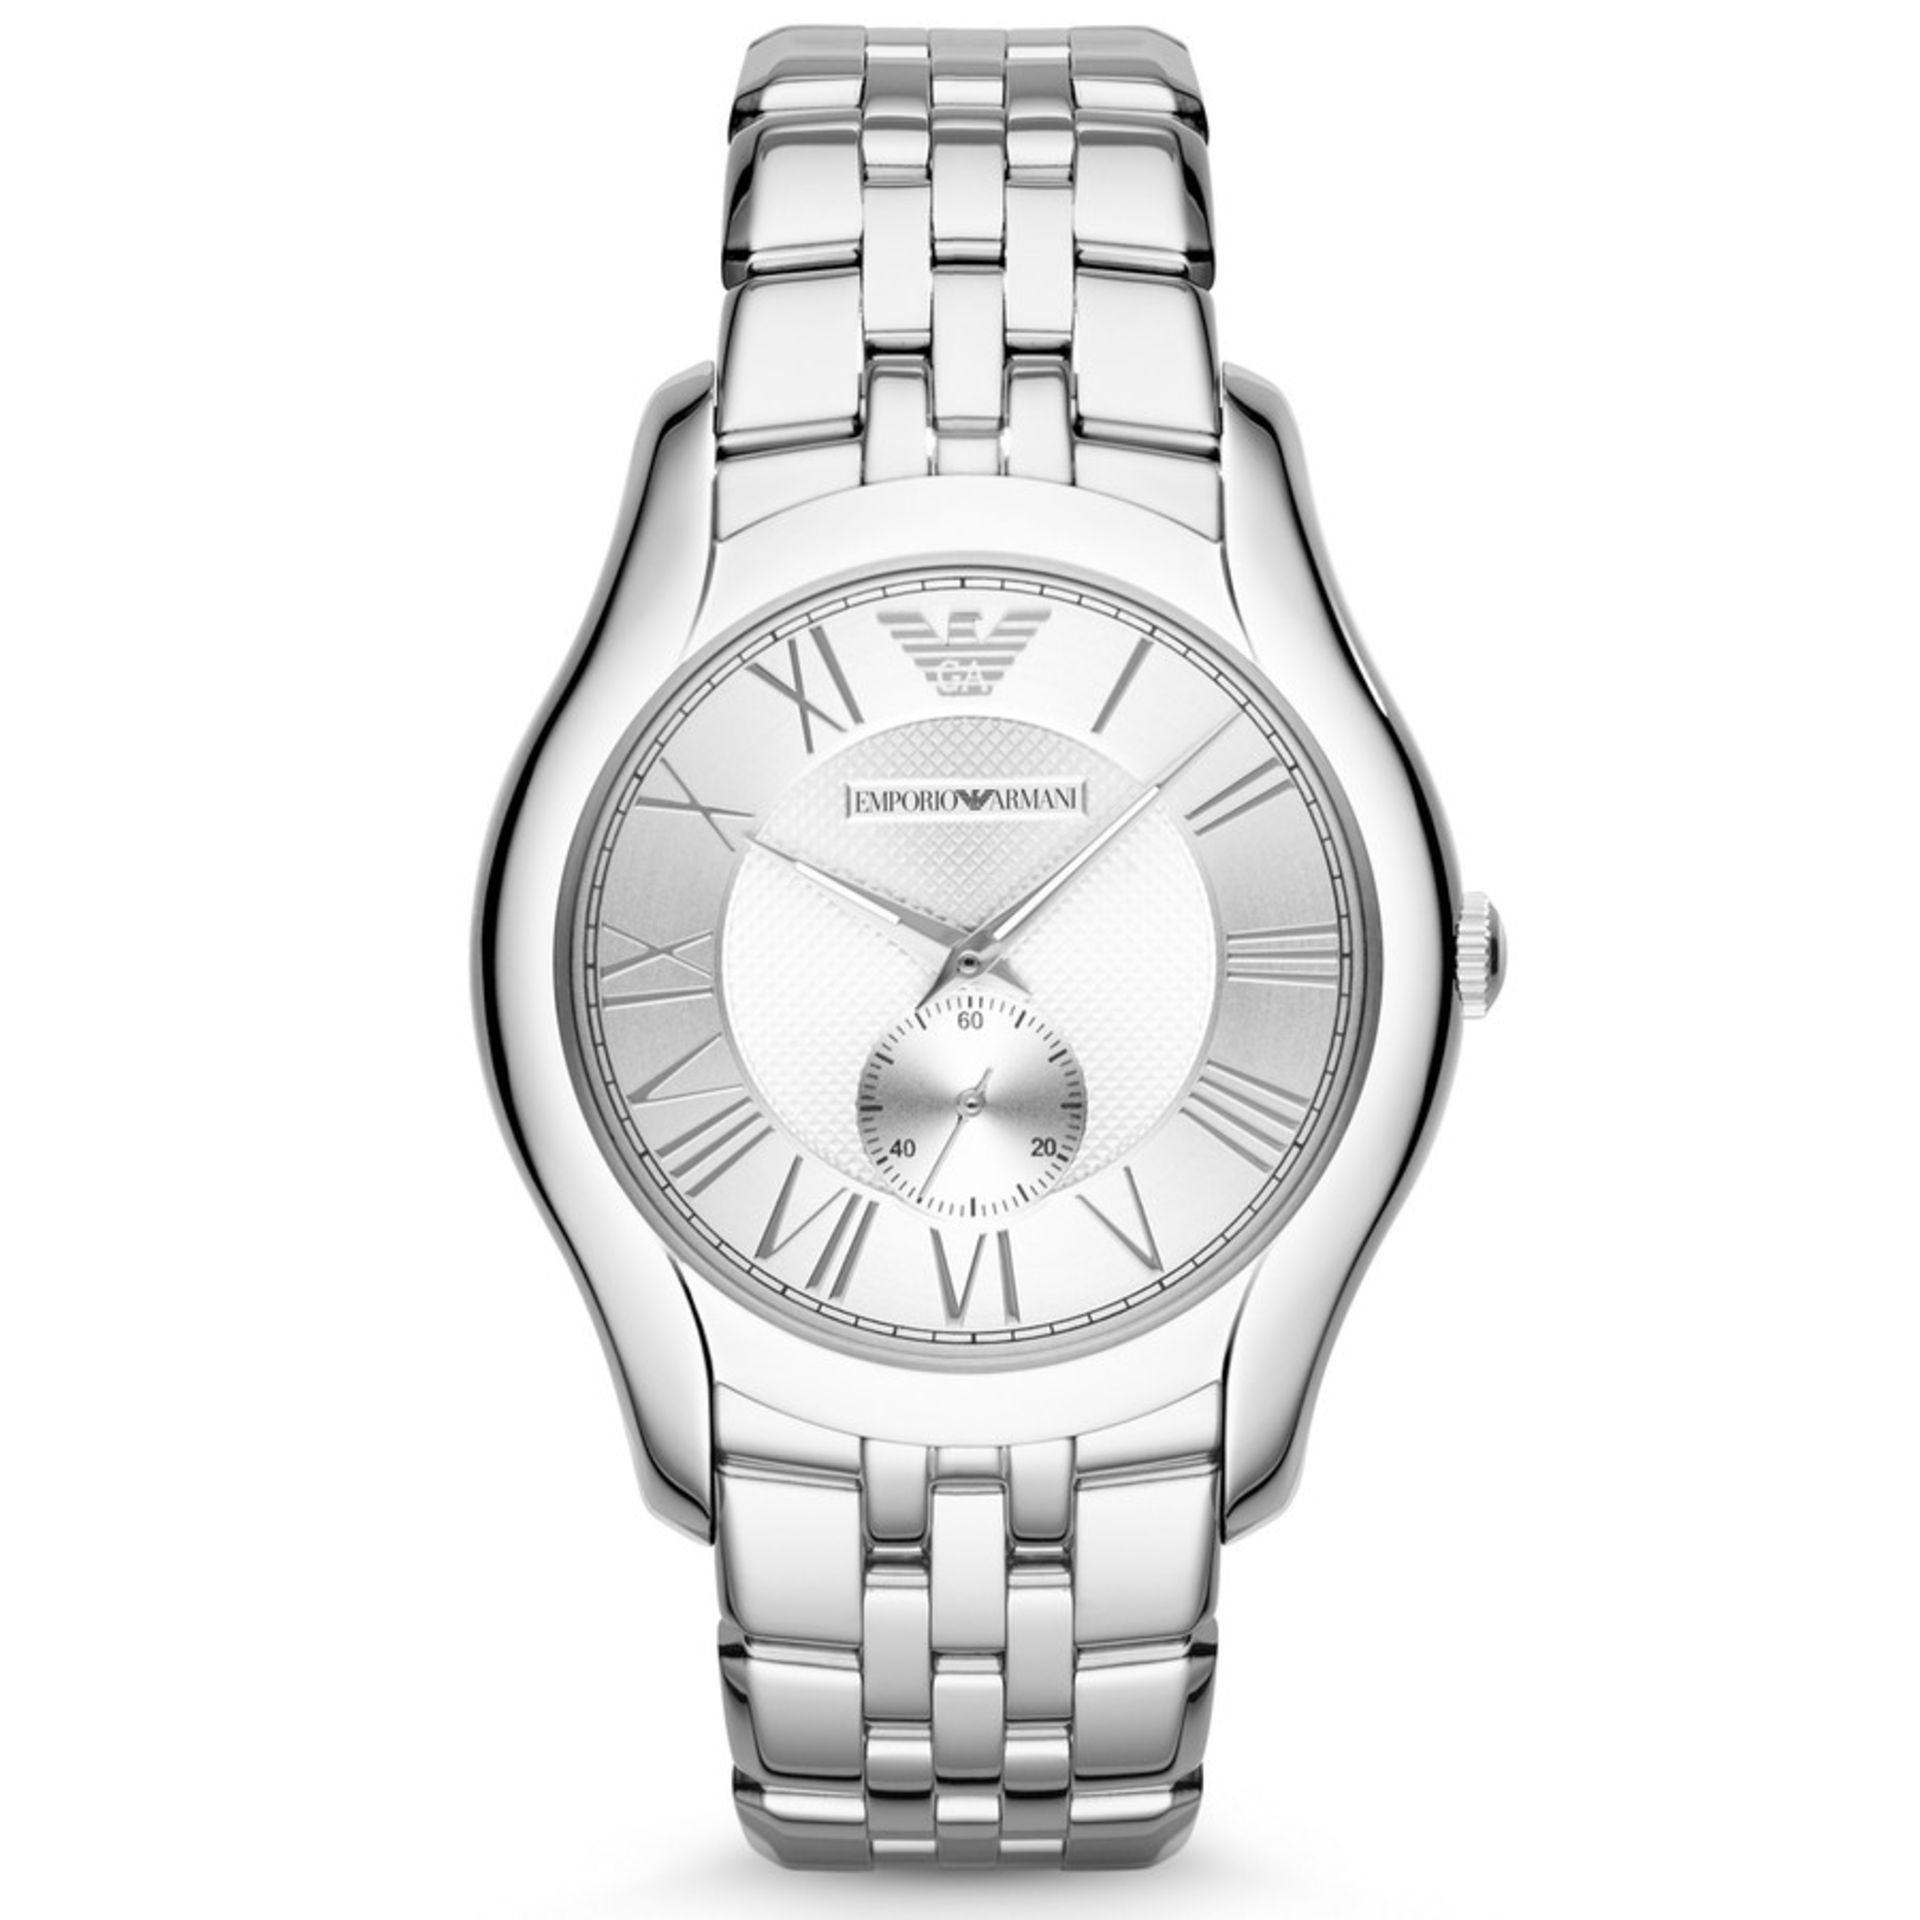 Gents Emporio Armani watch, model number AR1788, stainless steel casing and bracelet strap. Round